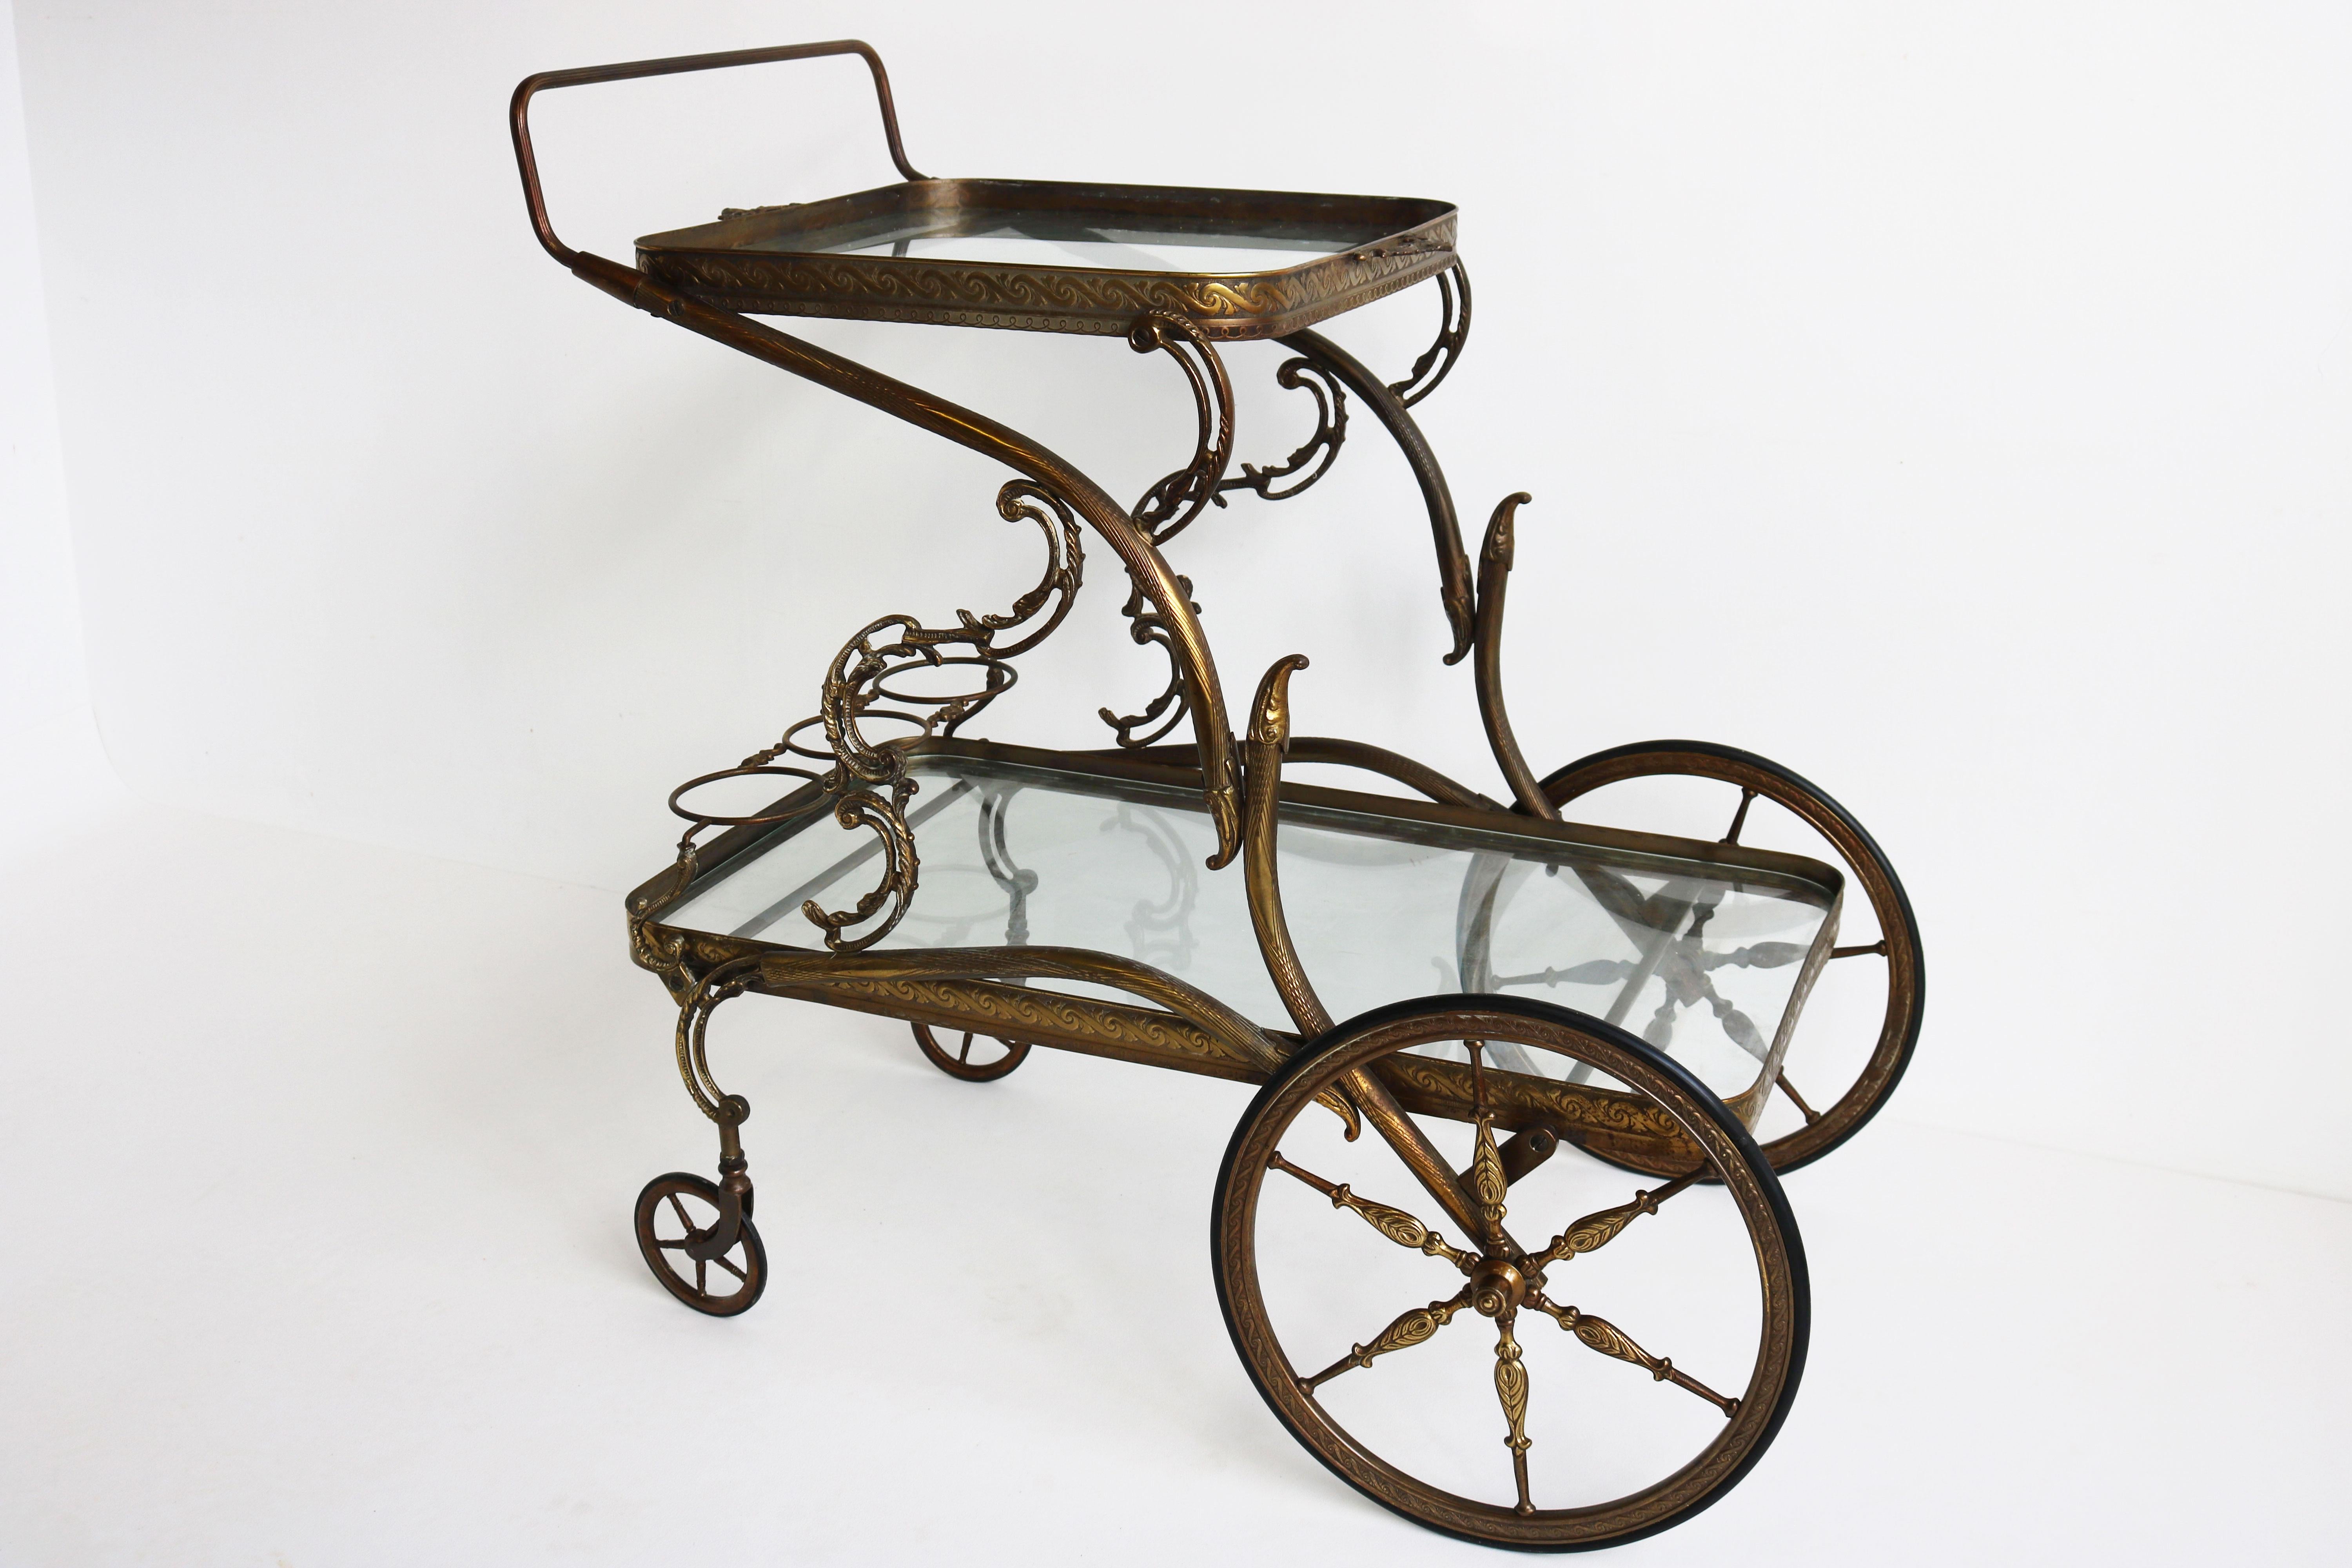 Exquisite Italian 1940s Hollywood Regency Bar Cart / Trolley Rococo Brass Glass For Sale 2